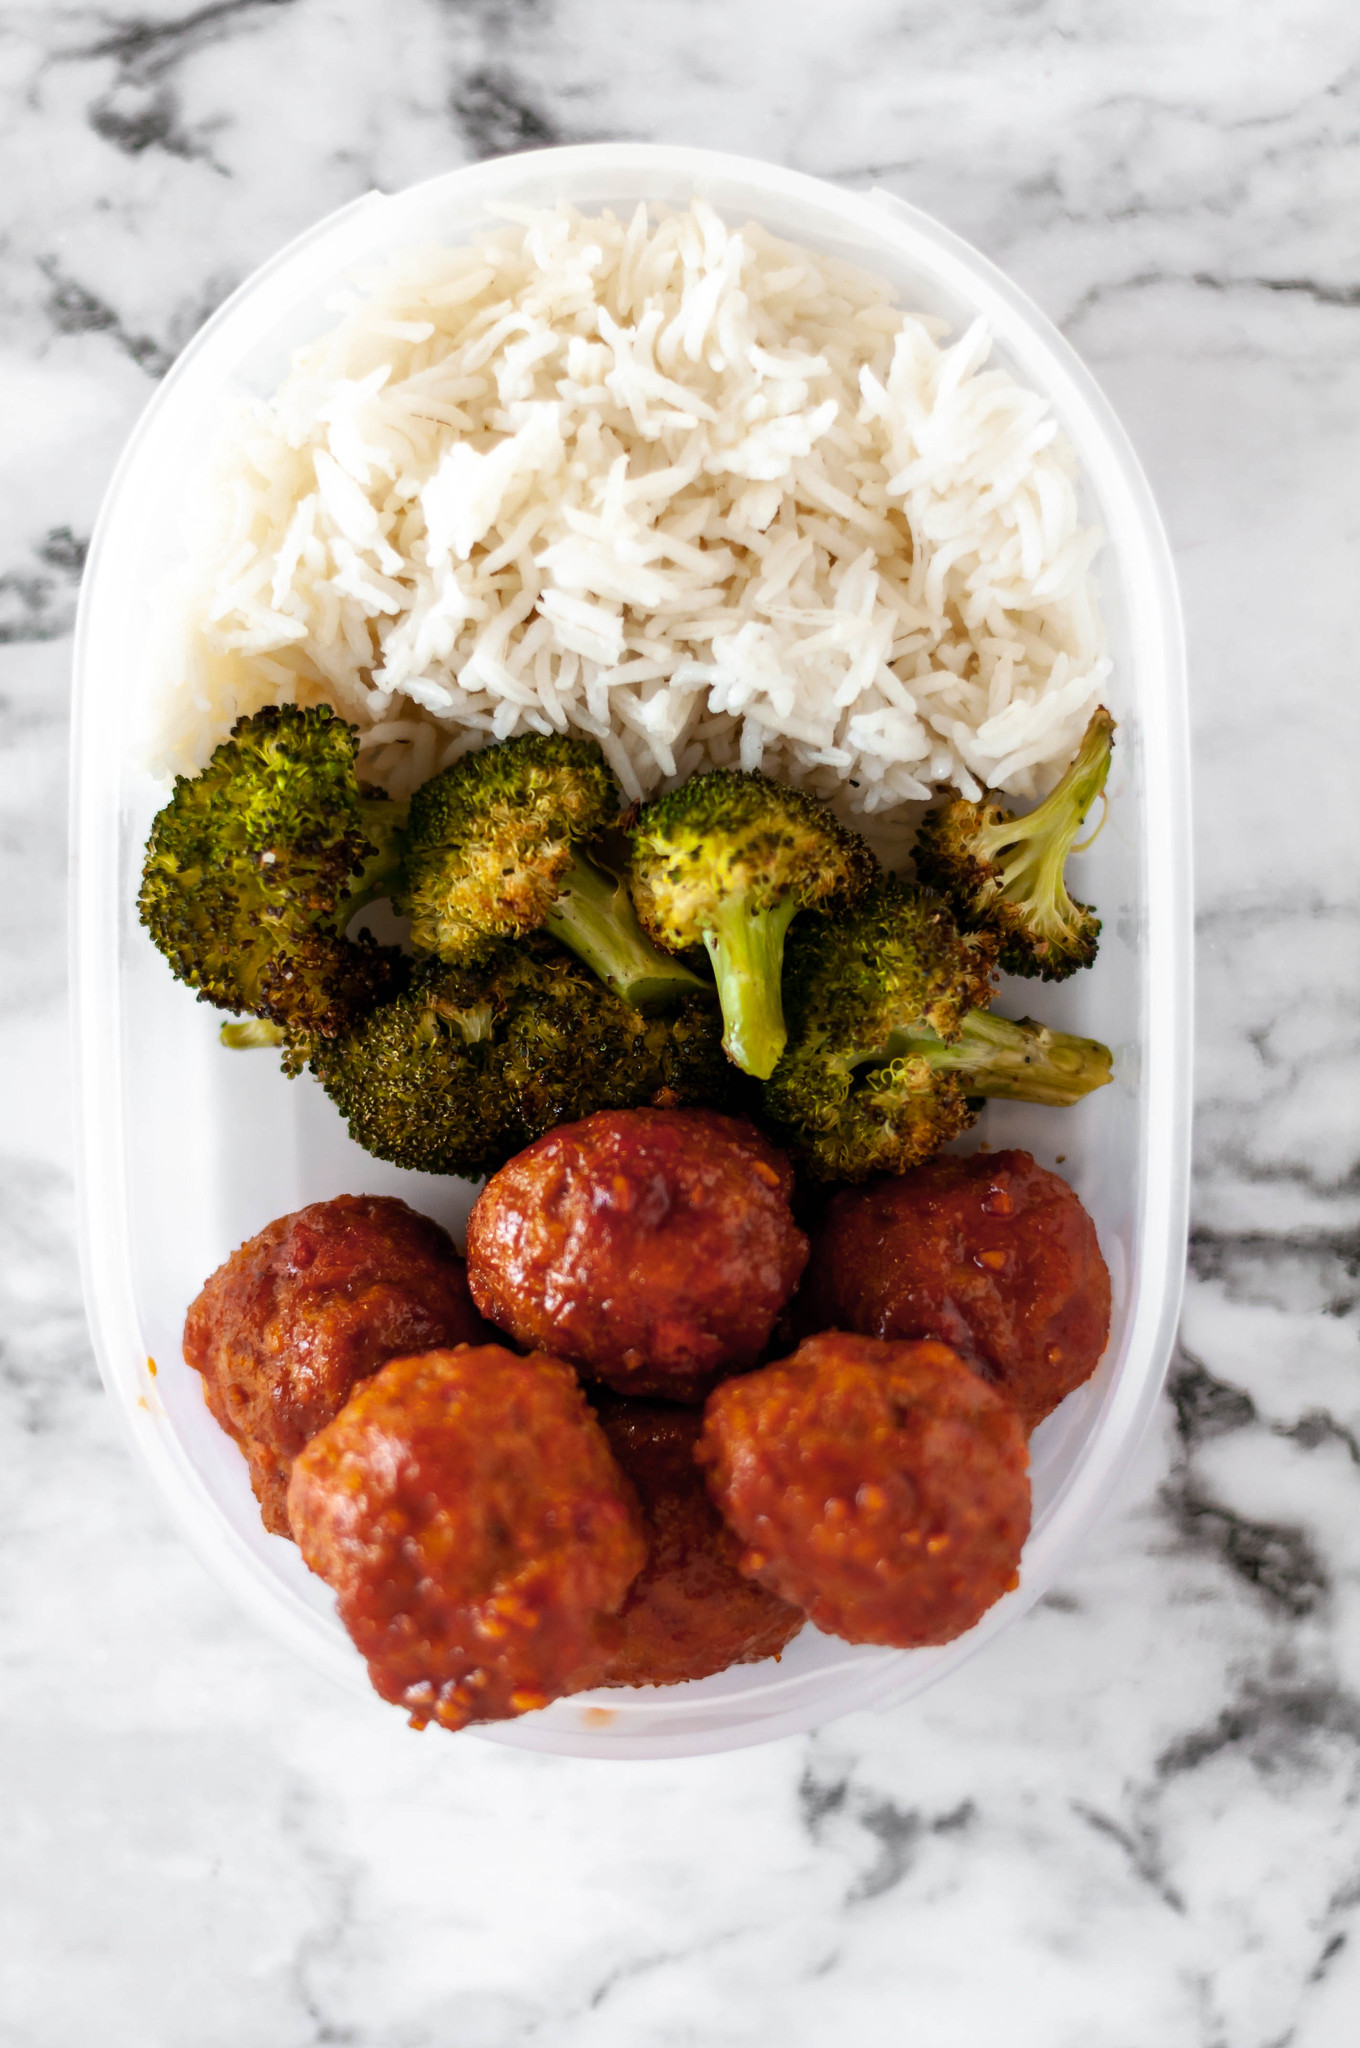 Korean Meatball Meal Prep makes a delicious lunch throughout the week. Baked on a sheet pan along with broccoli. Spicy and so flavorful.